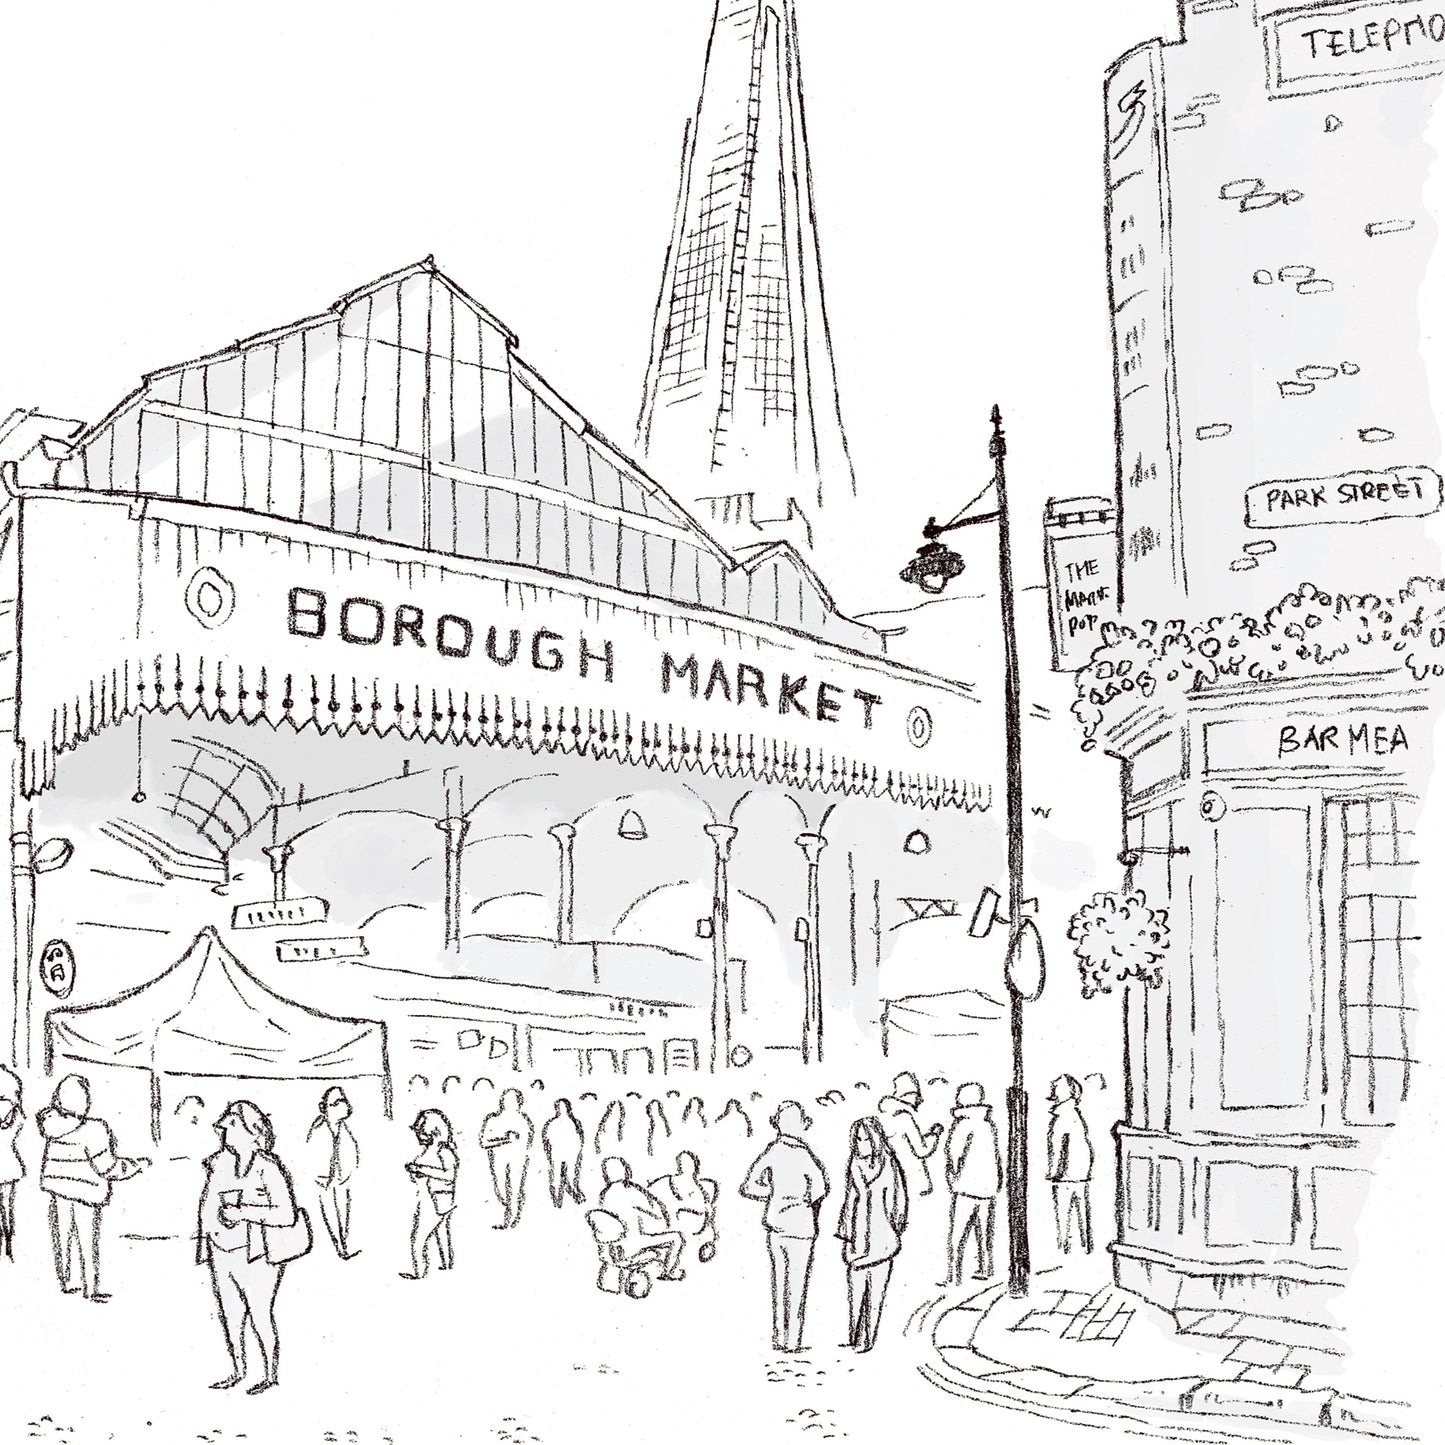 Close up of print of London's Borough Market beautifully sketched by Mike Green.